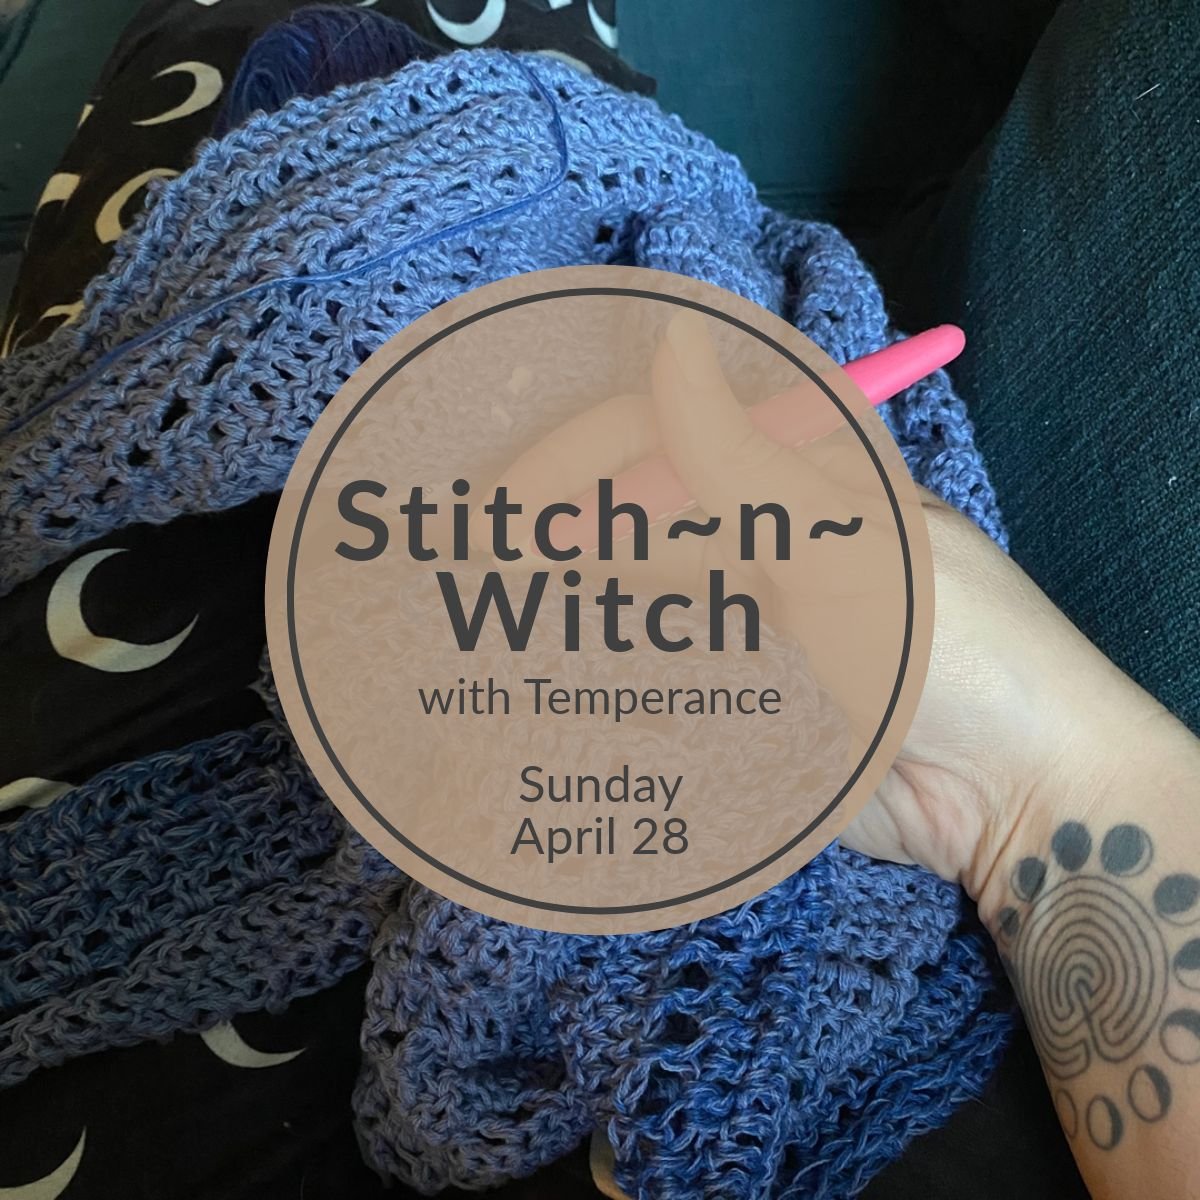 Join Temperance and others in the community on Sunday afternoon for a fun gathering where you can work on your fiber crafts with others.

Stitch n Witch with Temperance
Sunday, April 28th from 1:00pm to 3:00pm
Free
Now Twice a Month! 

Donations towa